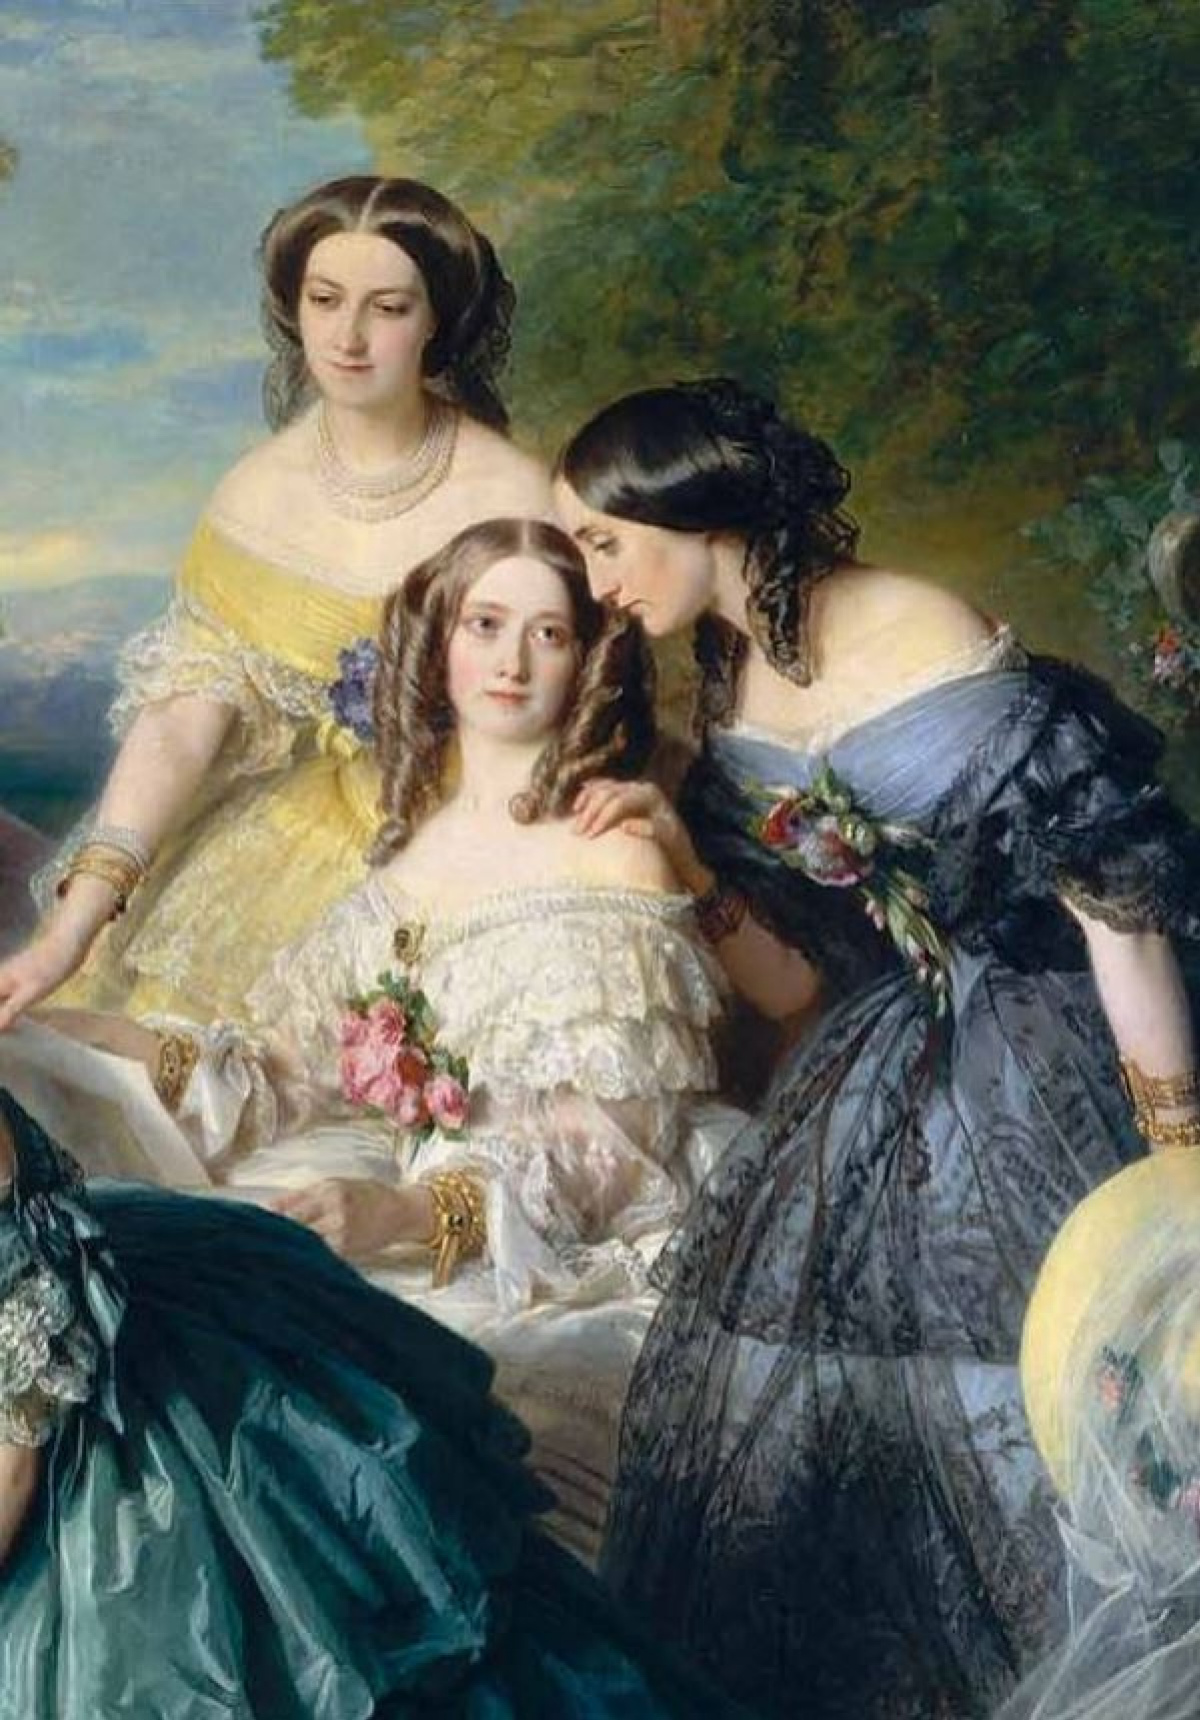 The Empress Eugenie with her ladies in waiting. Fragment, 1855